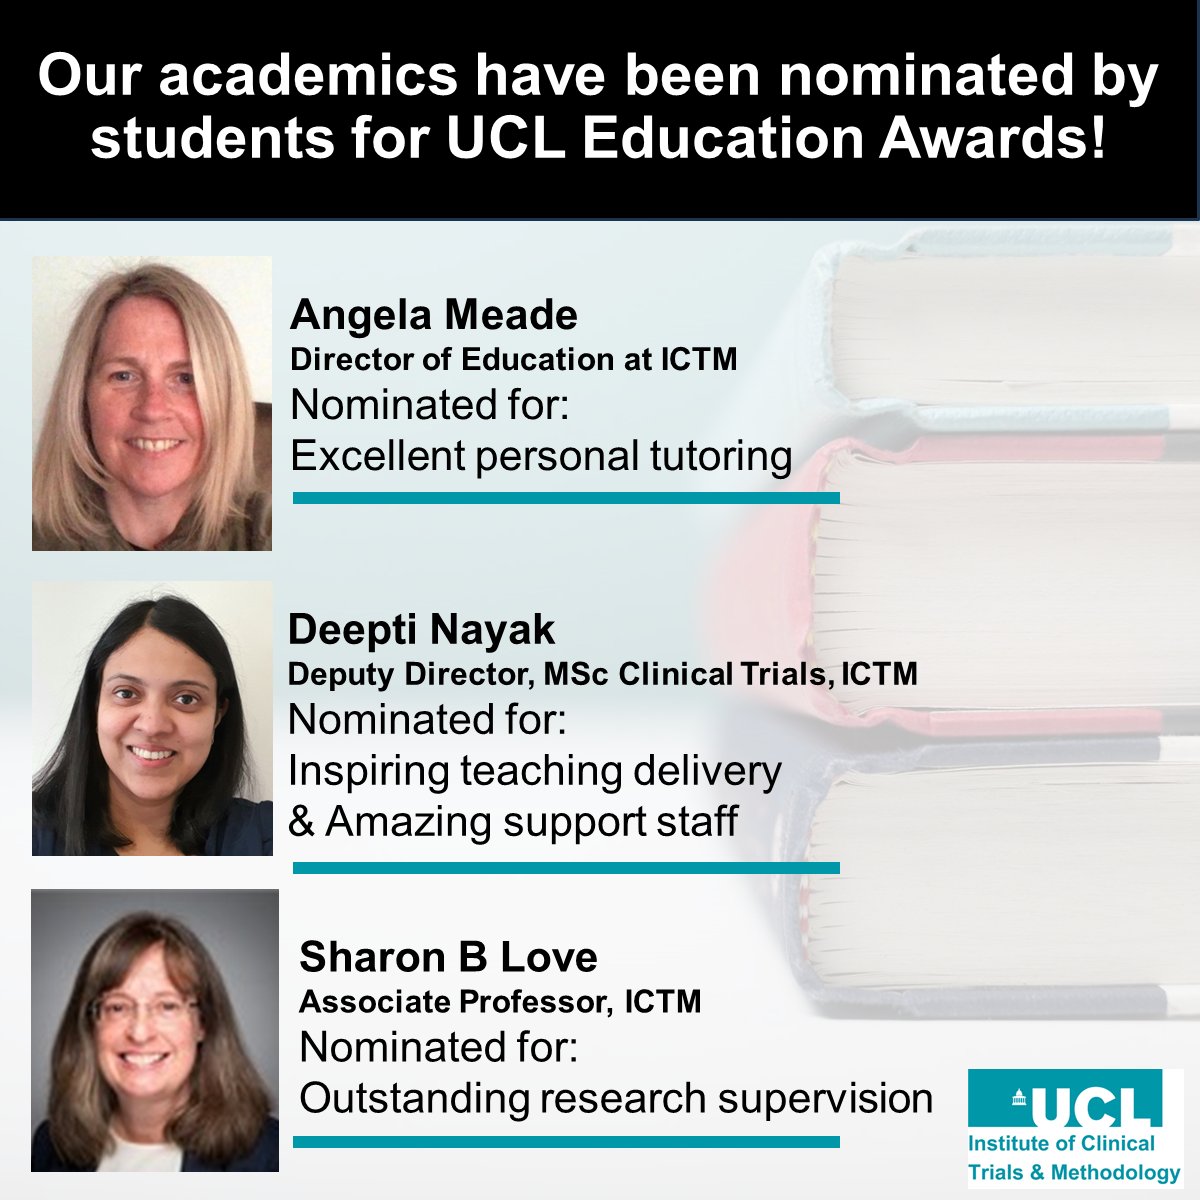 Three fantastic members of our staff have been nominated for UCL Education Awards by our MSc students! Well done to Angela Meade, Deepti Nayak, and Sharon Love for this recognition of their dedication to our students! #UCL #EducationAwards #HigherEdTeachingAwards